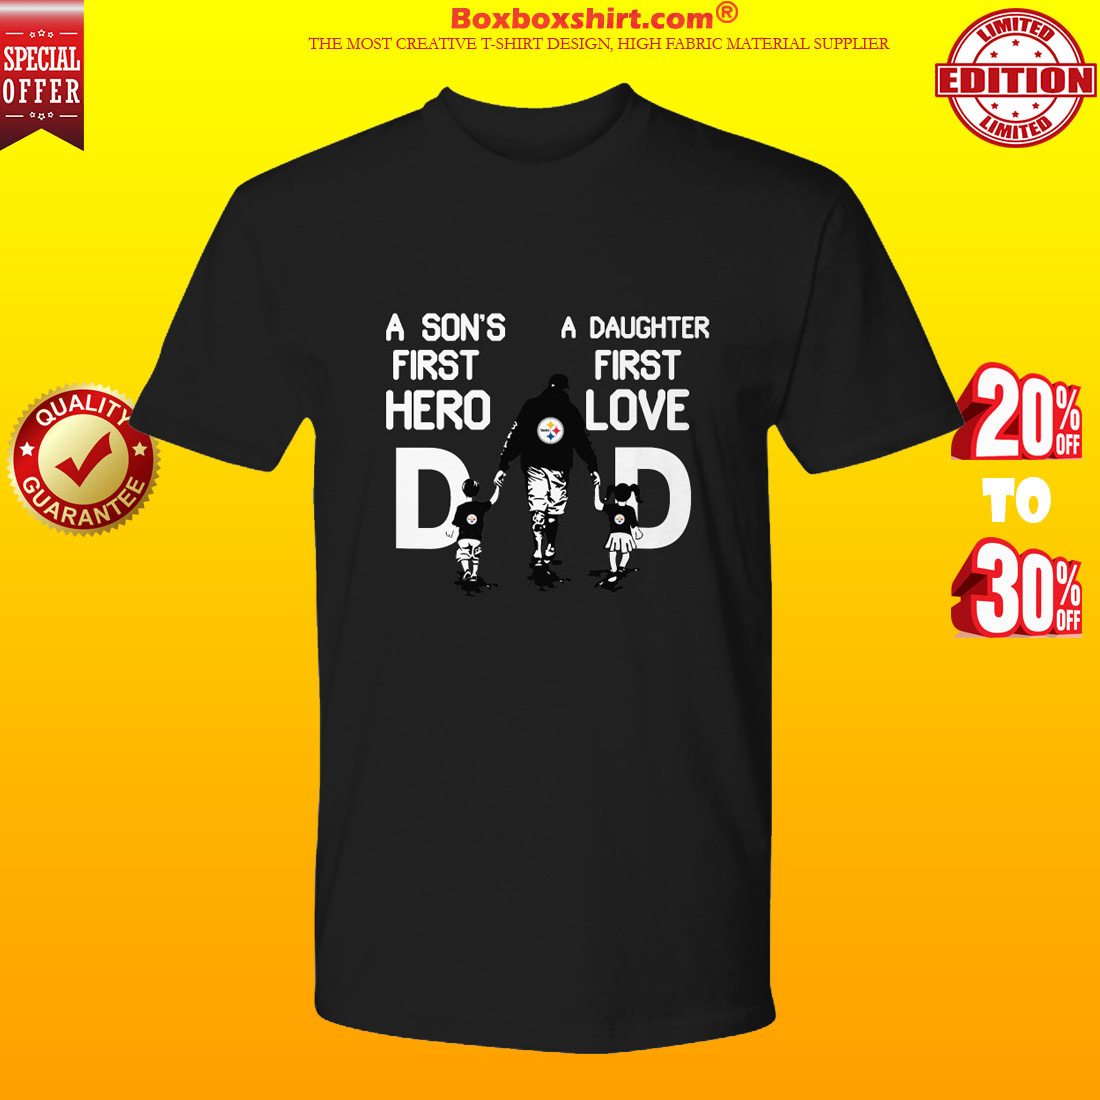 Pittsburgh Steelers dad a son's first hero a daughter first love premium tee shirt